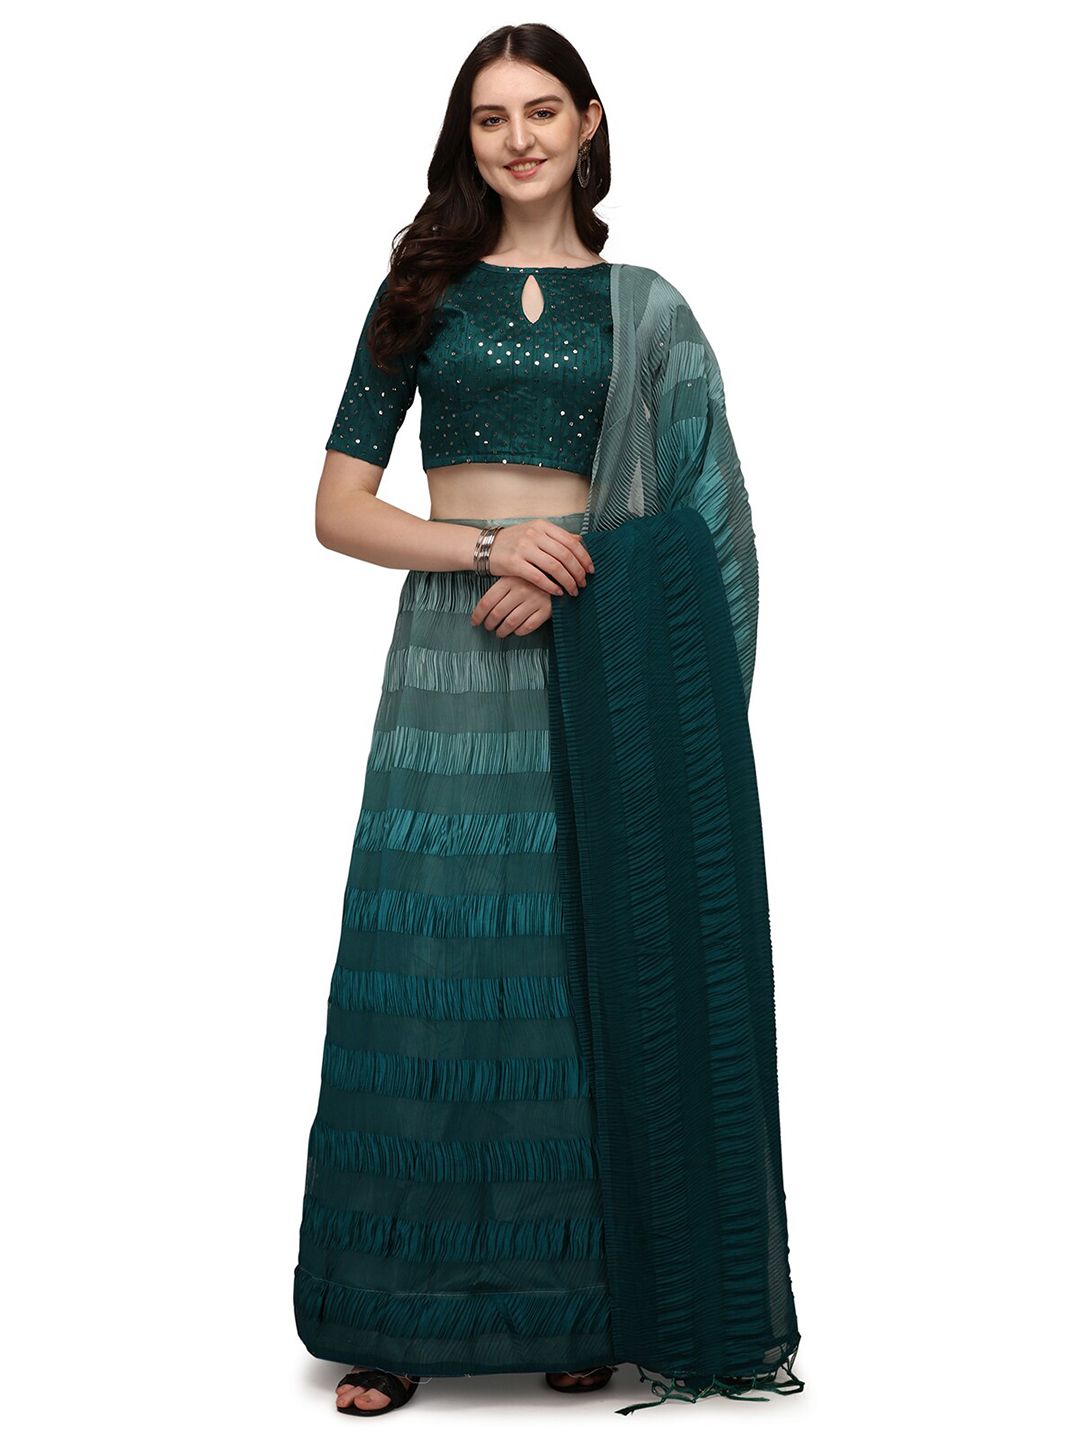 Pratham Blue Green Embroidered Semi-Stitched Lehenga & Unstitched Blouse With Dupatta Price in India